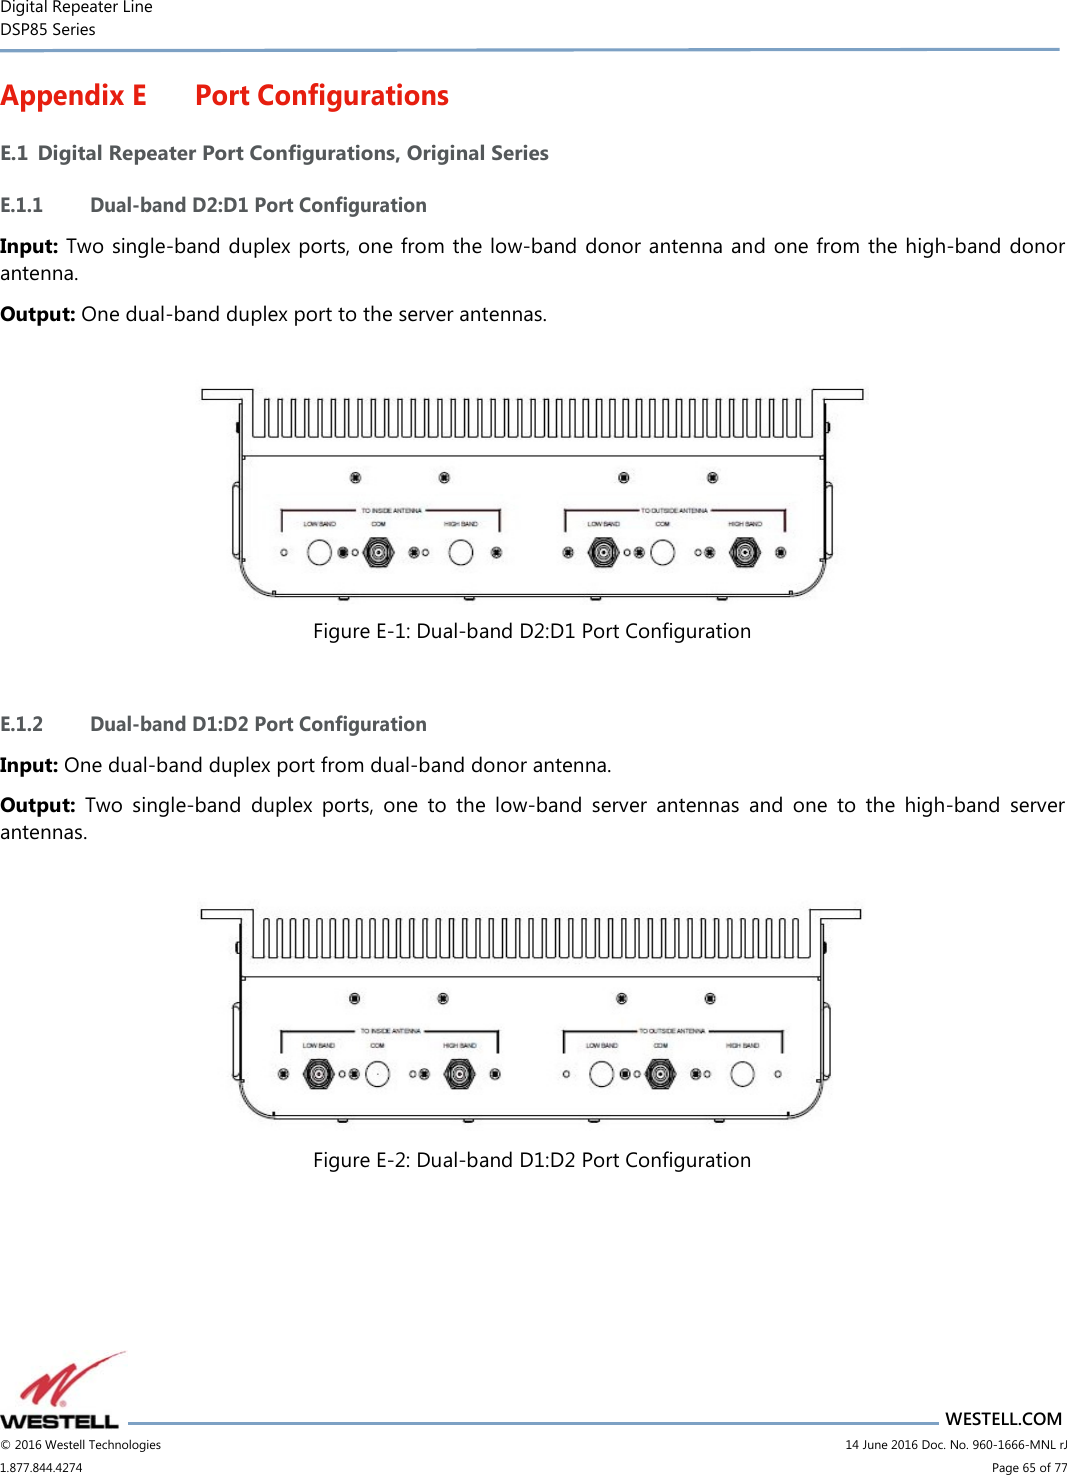 Digital Repeater Line DSP85 Series                       WESTELL.COM © 2016 Westell Technologies                         14 June 2016 Doc. No. 960-1666-MNL rJ 1.877.844.4274                             Page 65 of 77  Appendix E Port Configurations E.1 Digital Repeater Port Configurations, Original Series E.1.1 Dual-band D2:D1 Port Configuration Input: Two single-band duplex ports, one from the low-band donor antenna and one from the high-band donor antenna. Output: One dual-band duplex port to the server antennas.   Figure E-1: Dual-band D2:D1 Port Configuration  E.1.2 Dual-band D1:D2 Port Configuration Input: One dual-band duplex port from dual-band donor antenna. Output:  Two  single-band  duplex  ports,  one  to  the  low-band  server  antennas  and  one  to  the  high-band  server antennas.   Figure E-2: Dual-band D1:D2 Port Configuration    